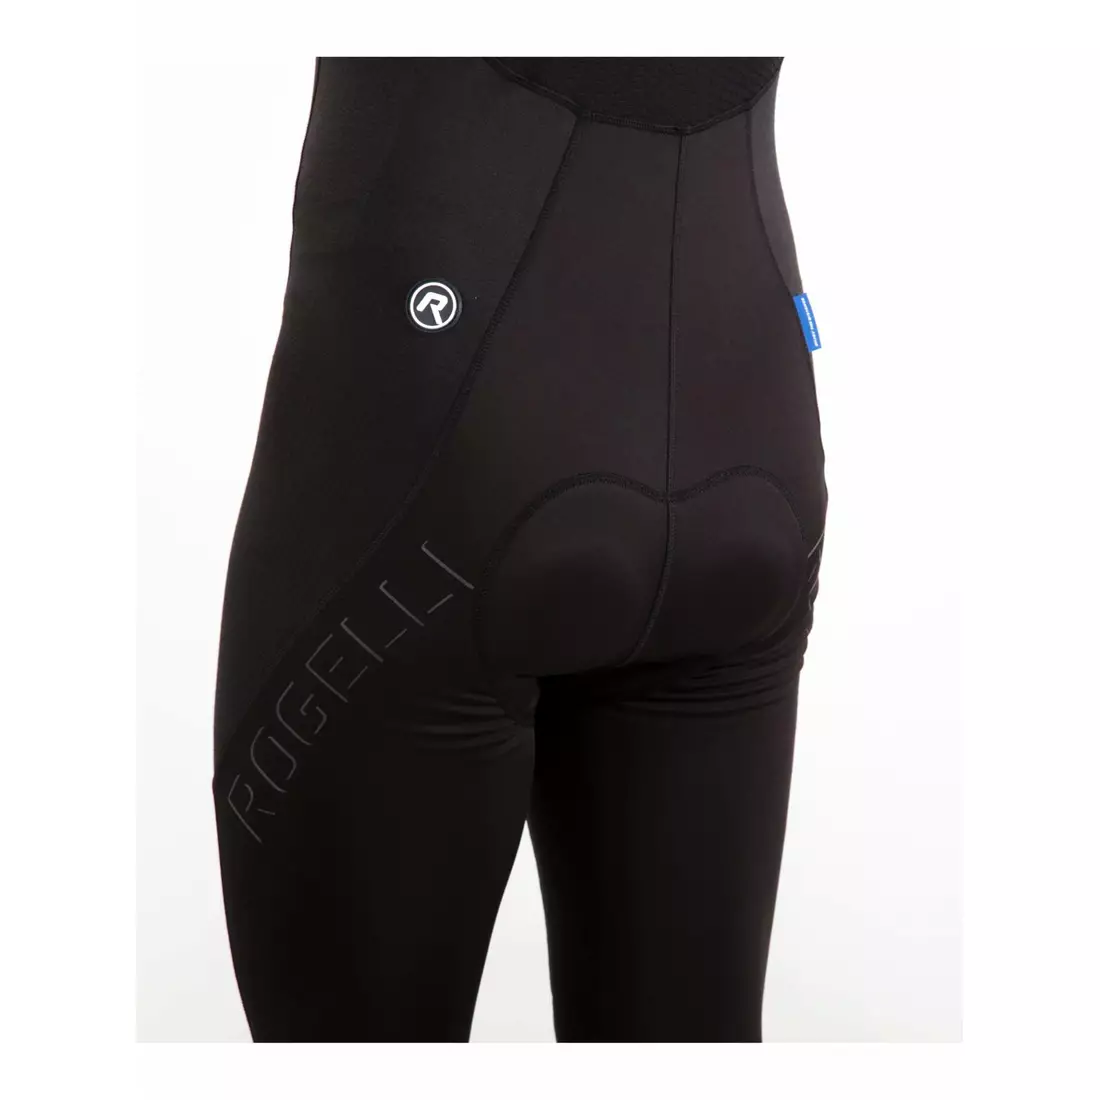 Rogelli FOCUS non-insulated cycling trousers with braces gel insert black 002.205